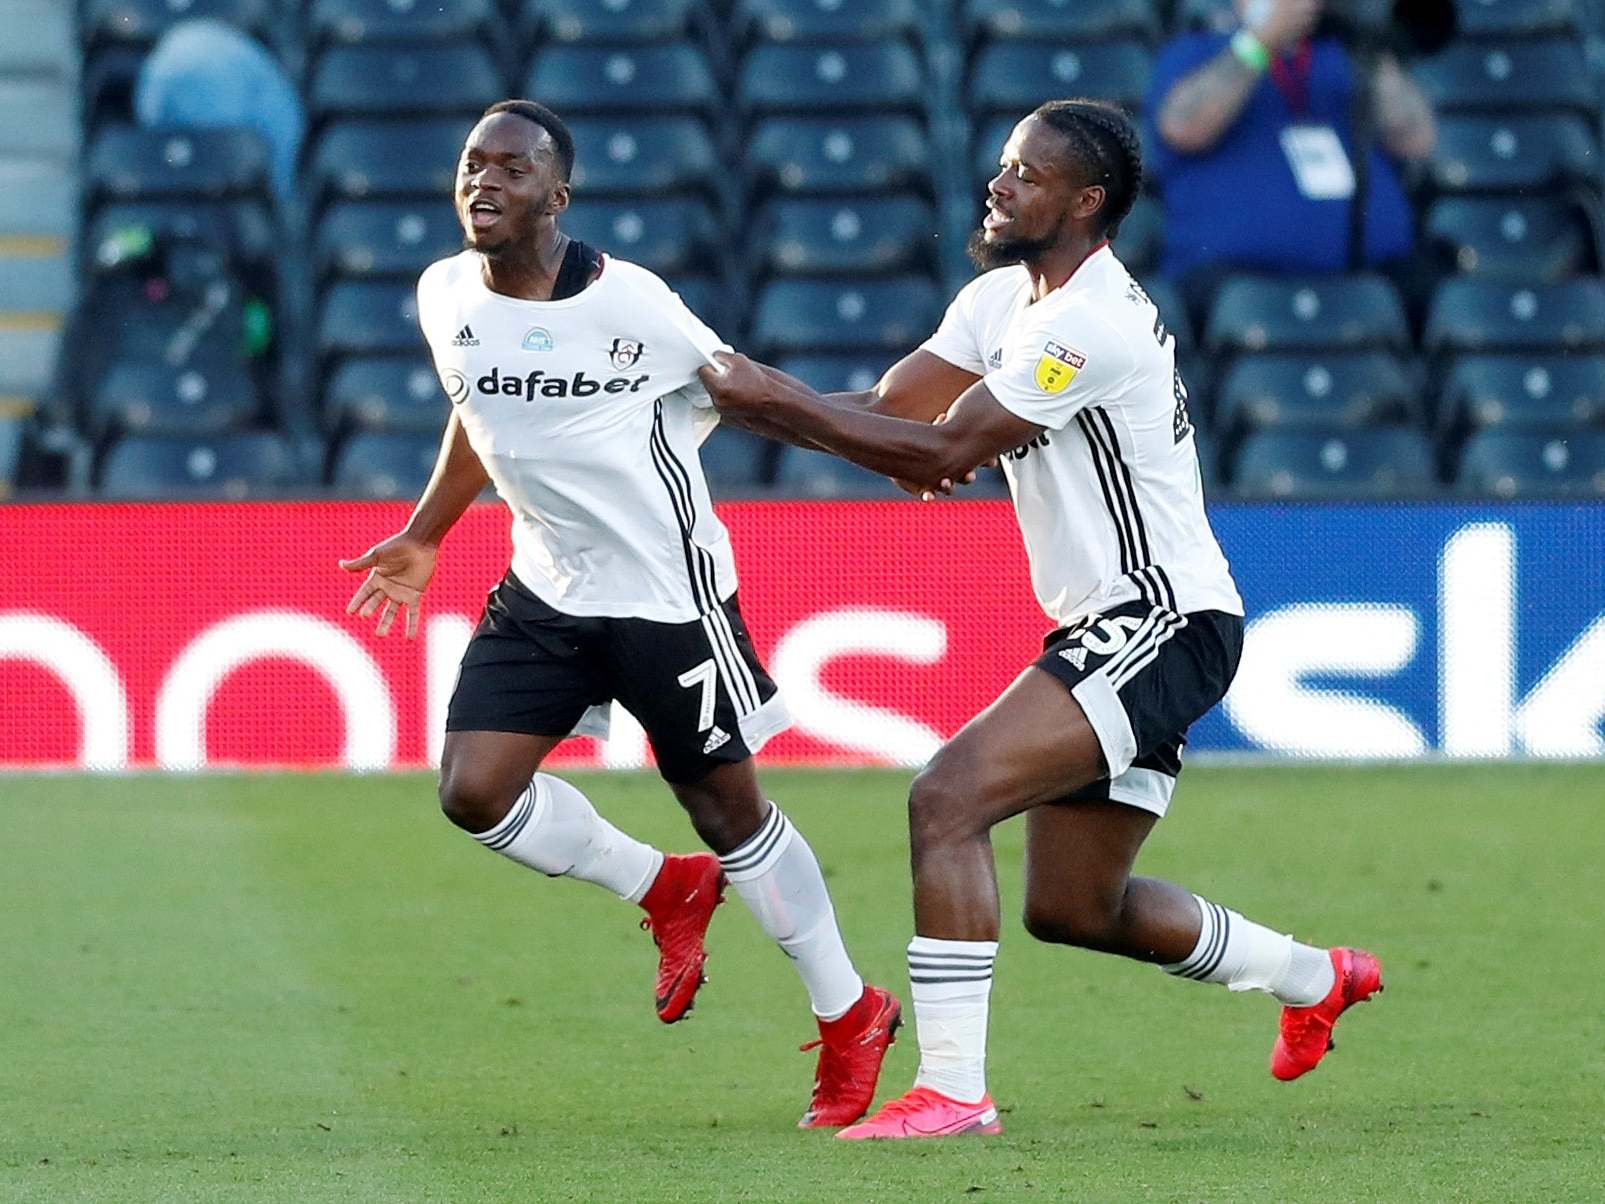 Championship: Fulham hold off Cardiff to book play-off final date at Wembley with Brentford